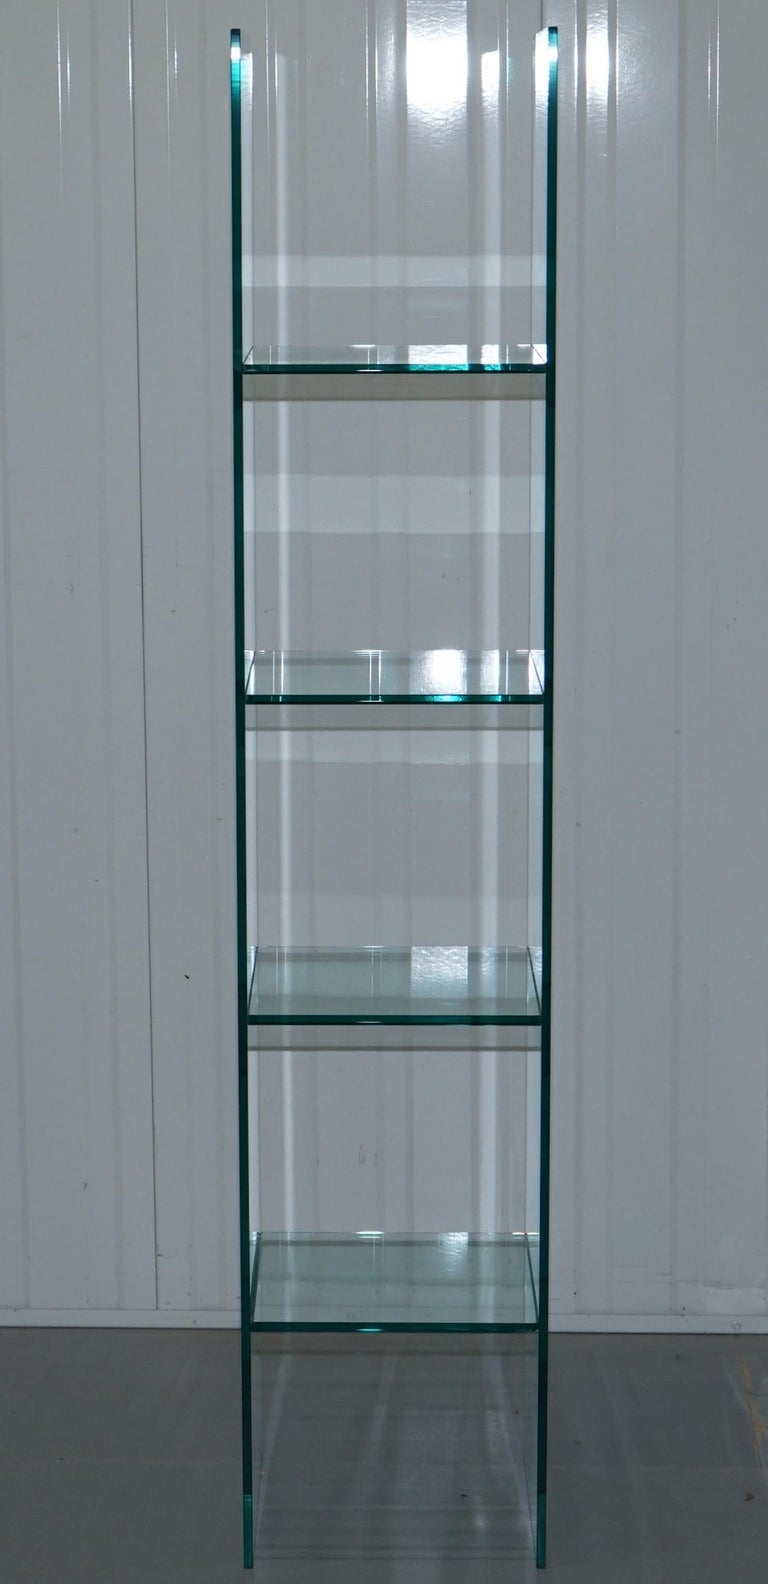 We are delighted to offer for sale this lovely 1987 Babele glass shelf designed by Massimo Morozzi for Fiam Italia.

Babele is a classic tower display unit in 10 mm-thick curved glass with welded and bevelled 10 mm-thick glass shelves. Its